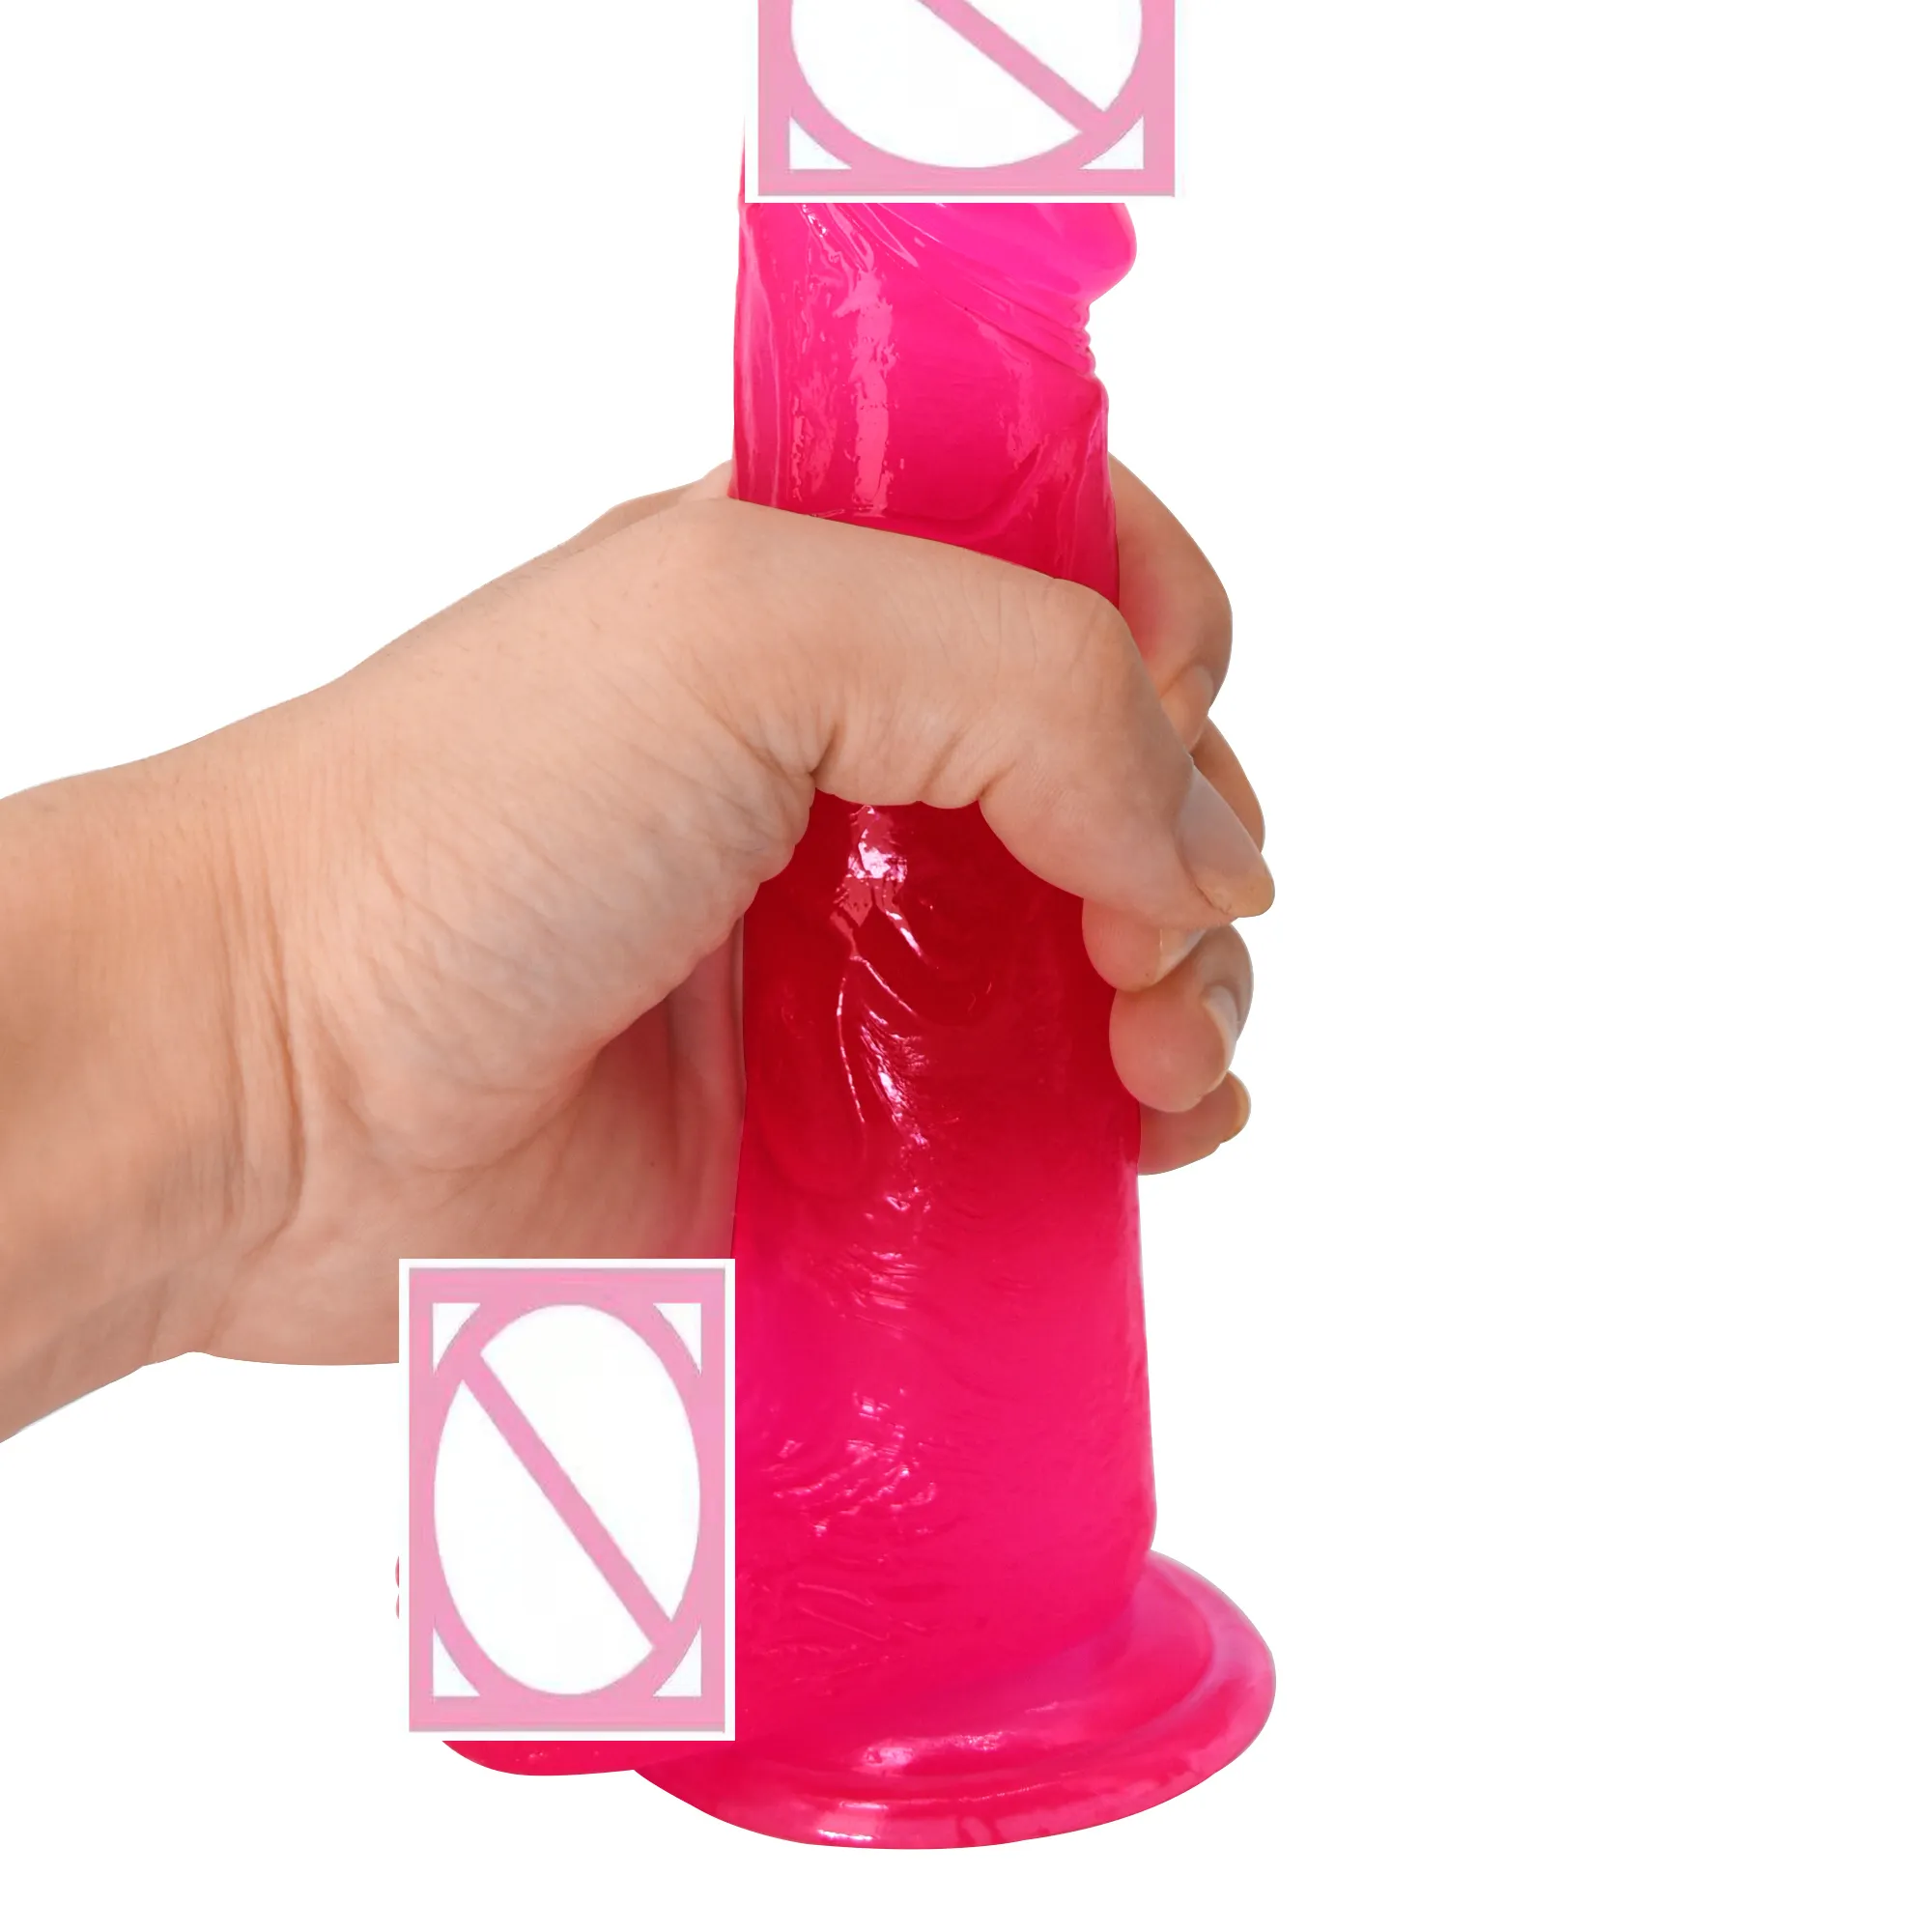 Xxx hot oem xxxxxxxx video for vagina sex machine sex products realistic clear crystal colorful dildo sextoy juguetes sexuals